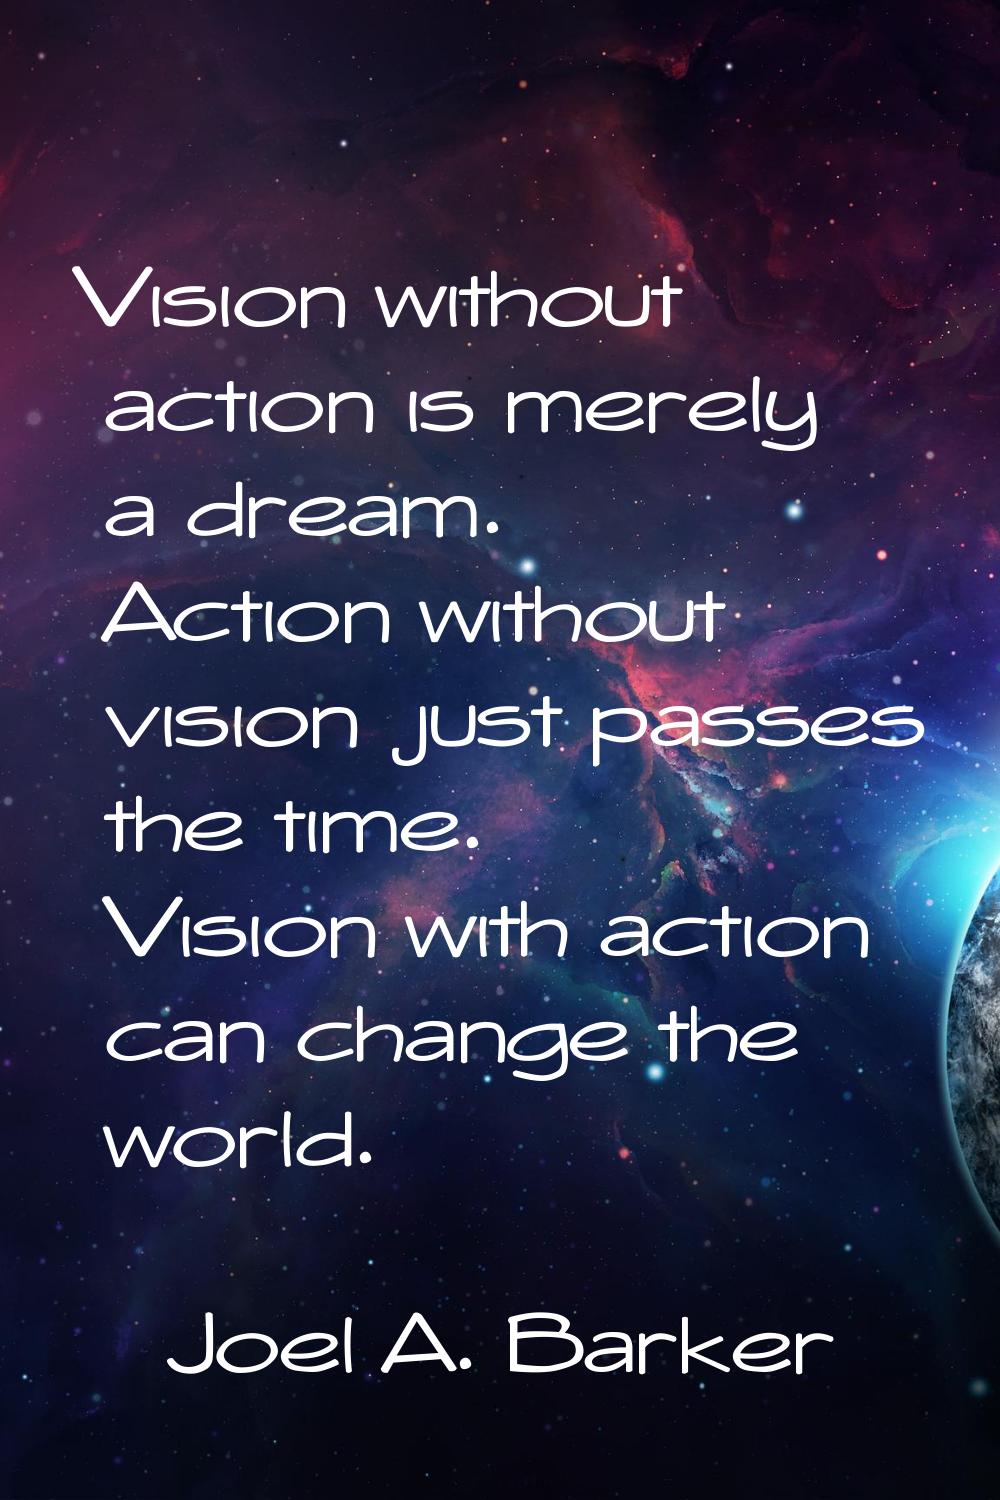 Vision without action is merely a dream. Action without vision just passes the time. Vision with ac